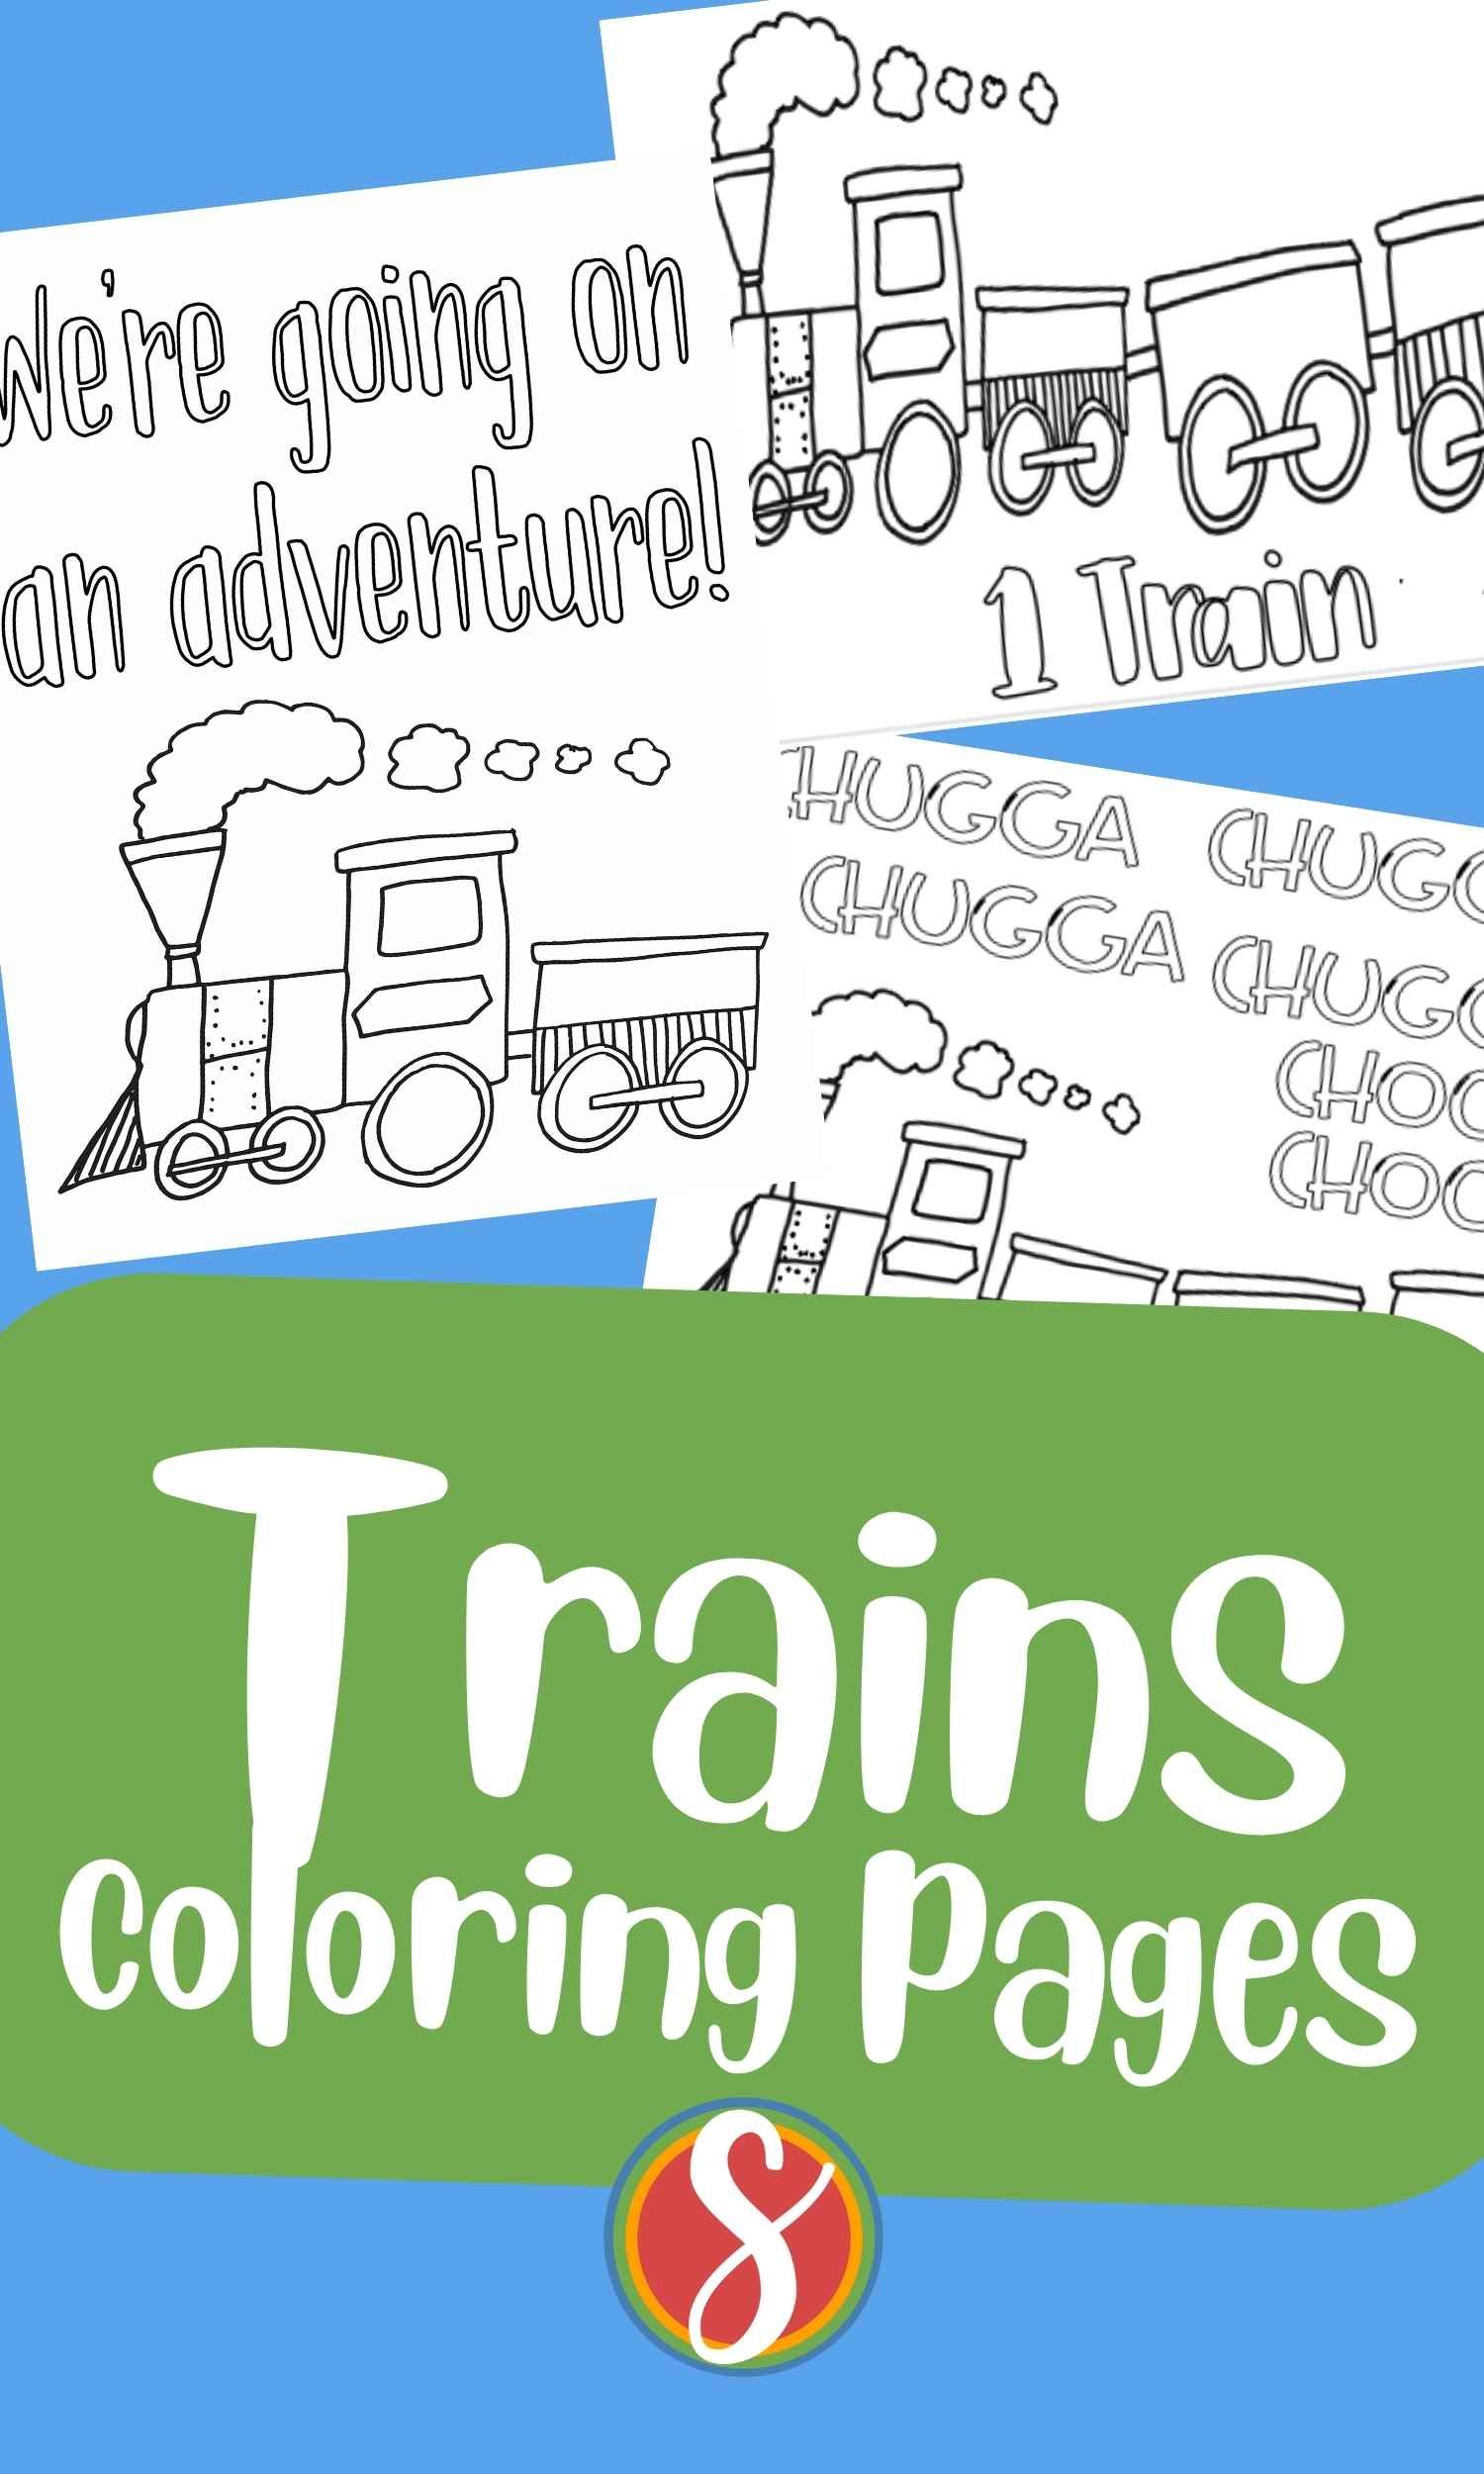 3 trains coloring pages with simple train drawings